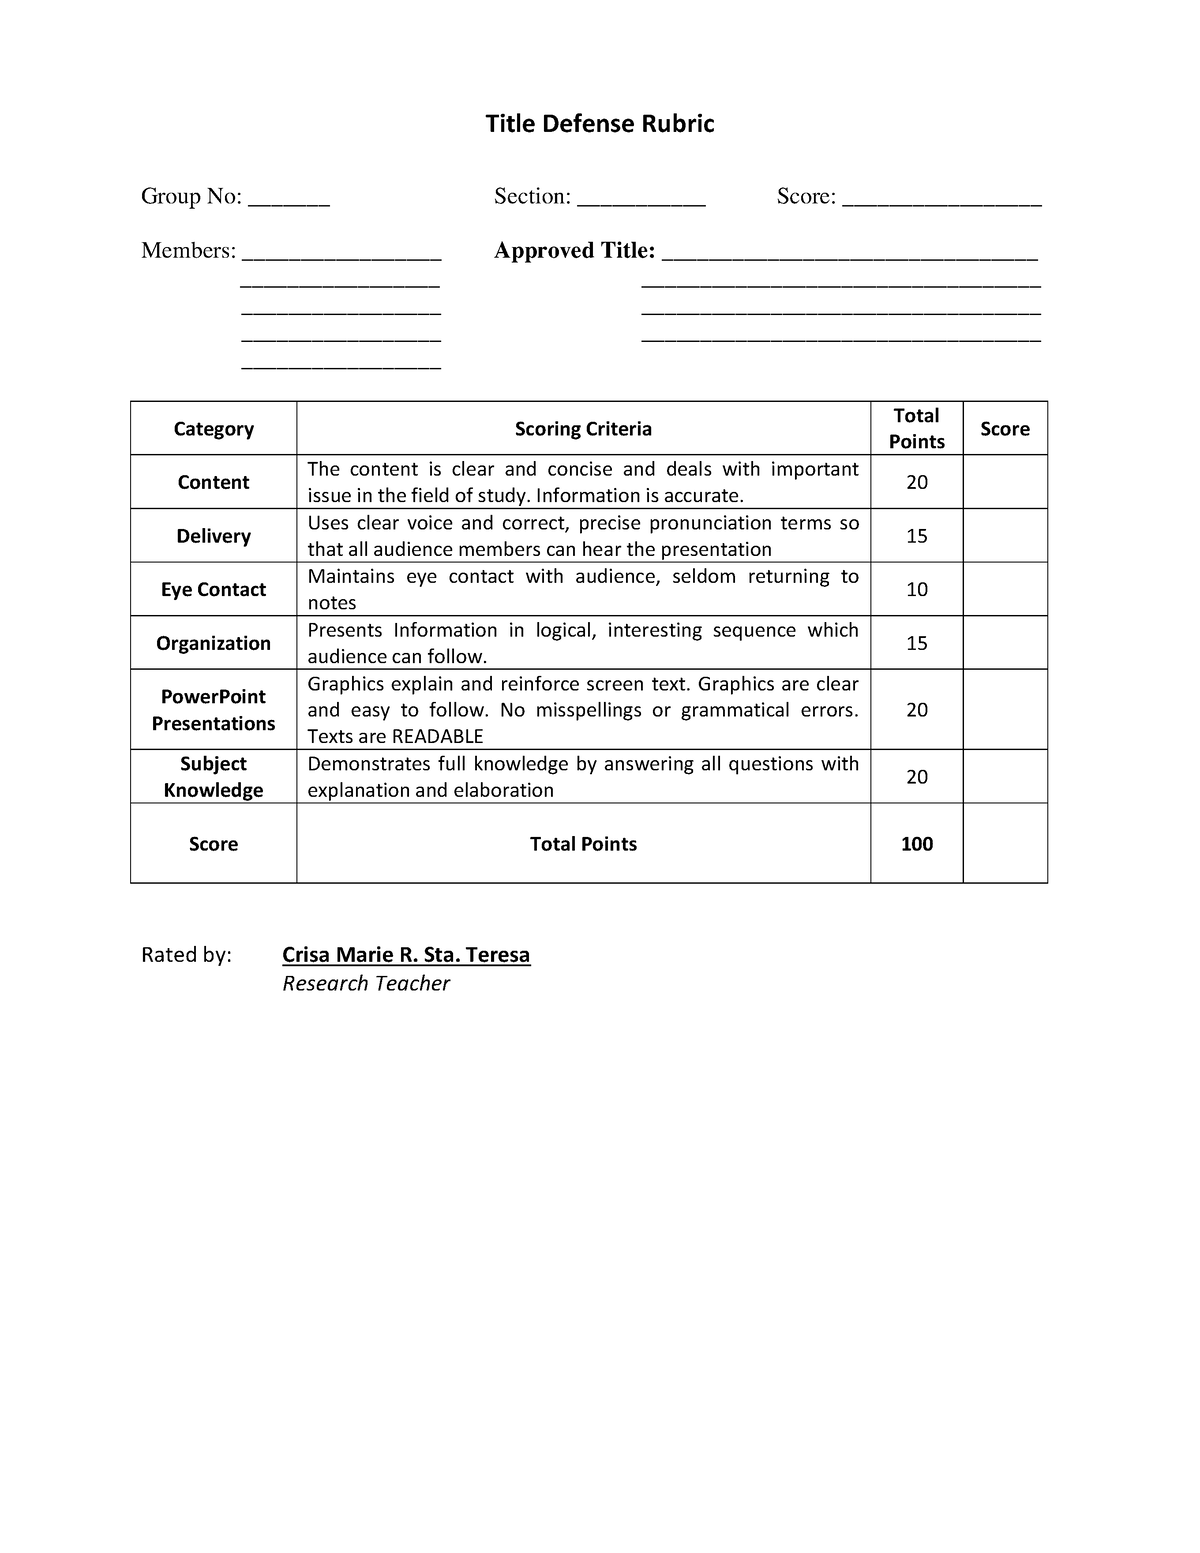 rubric for research proposal defense